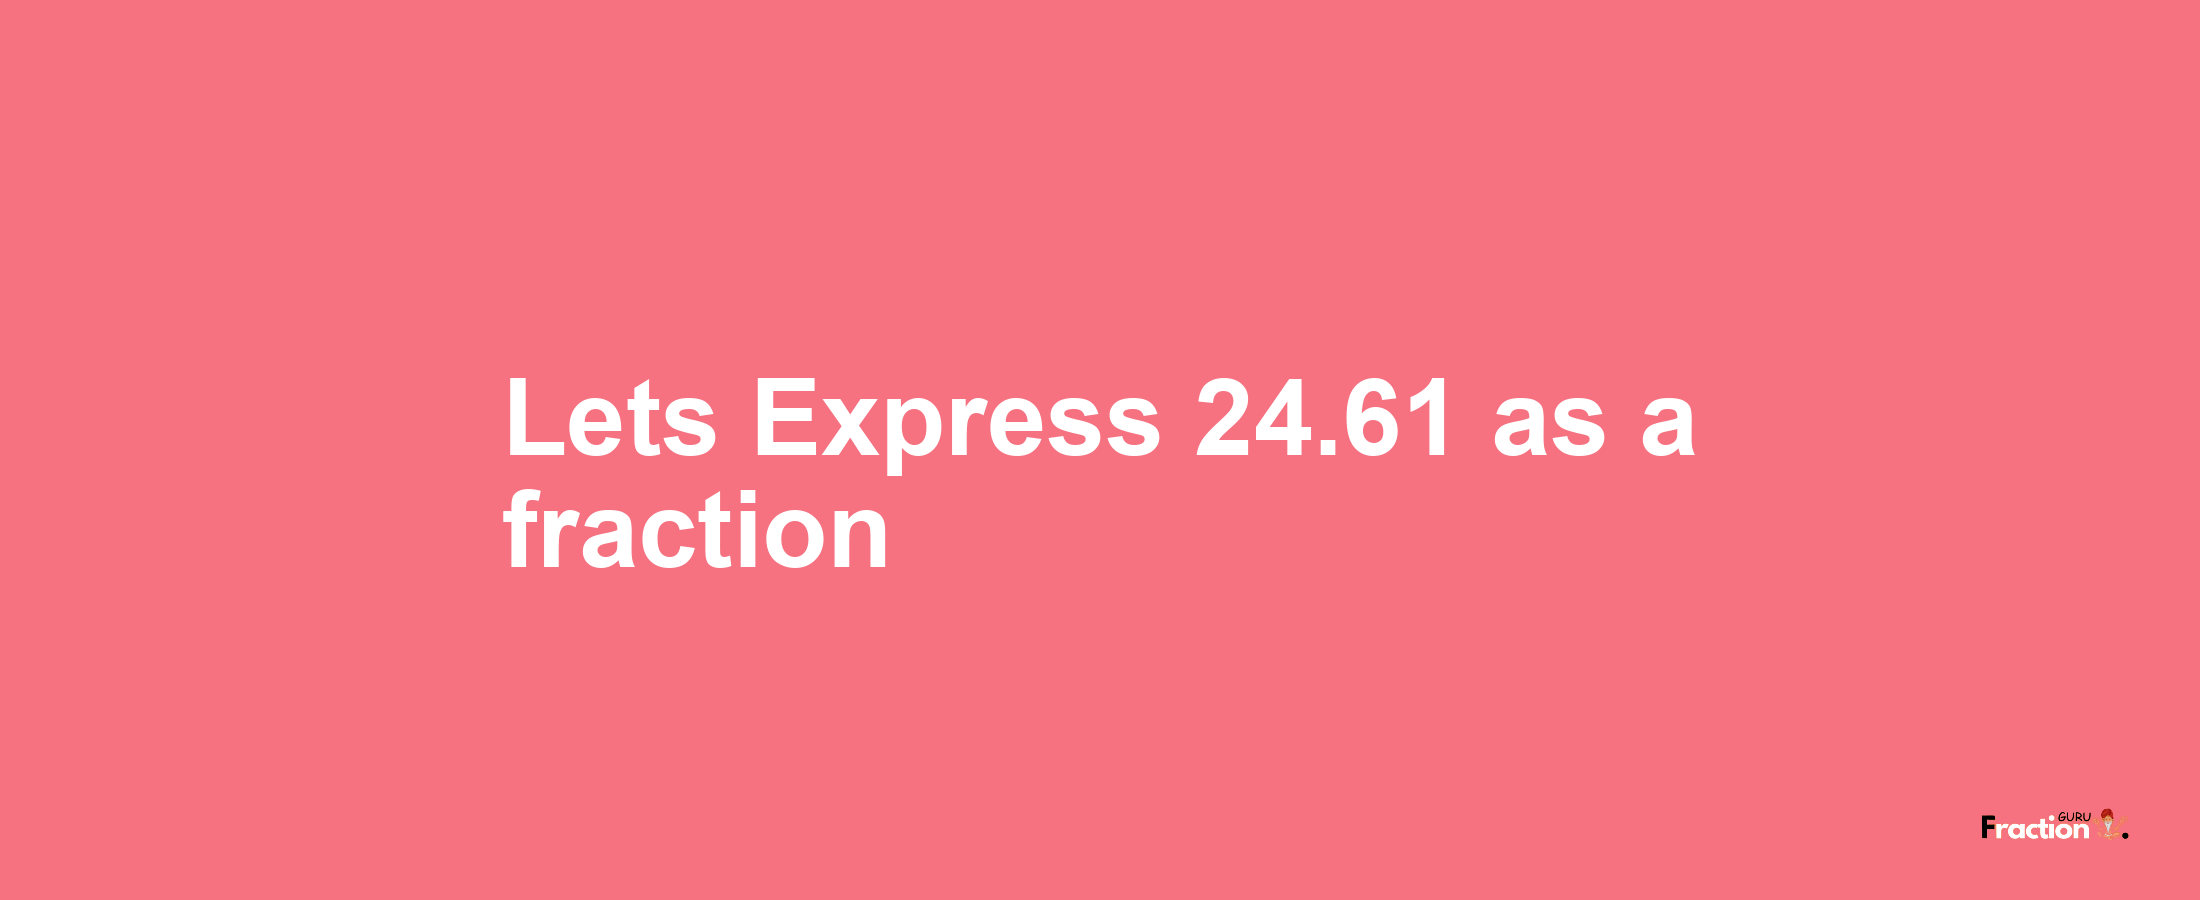 Lets Express 24.61 as afraction